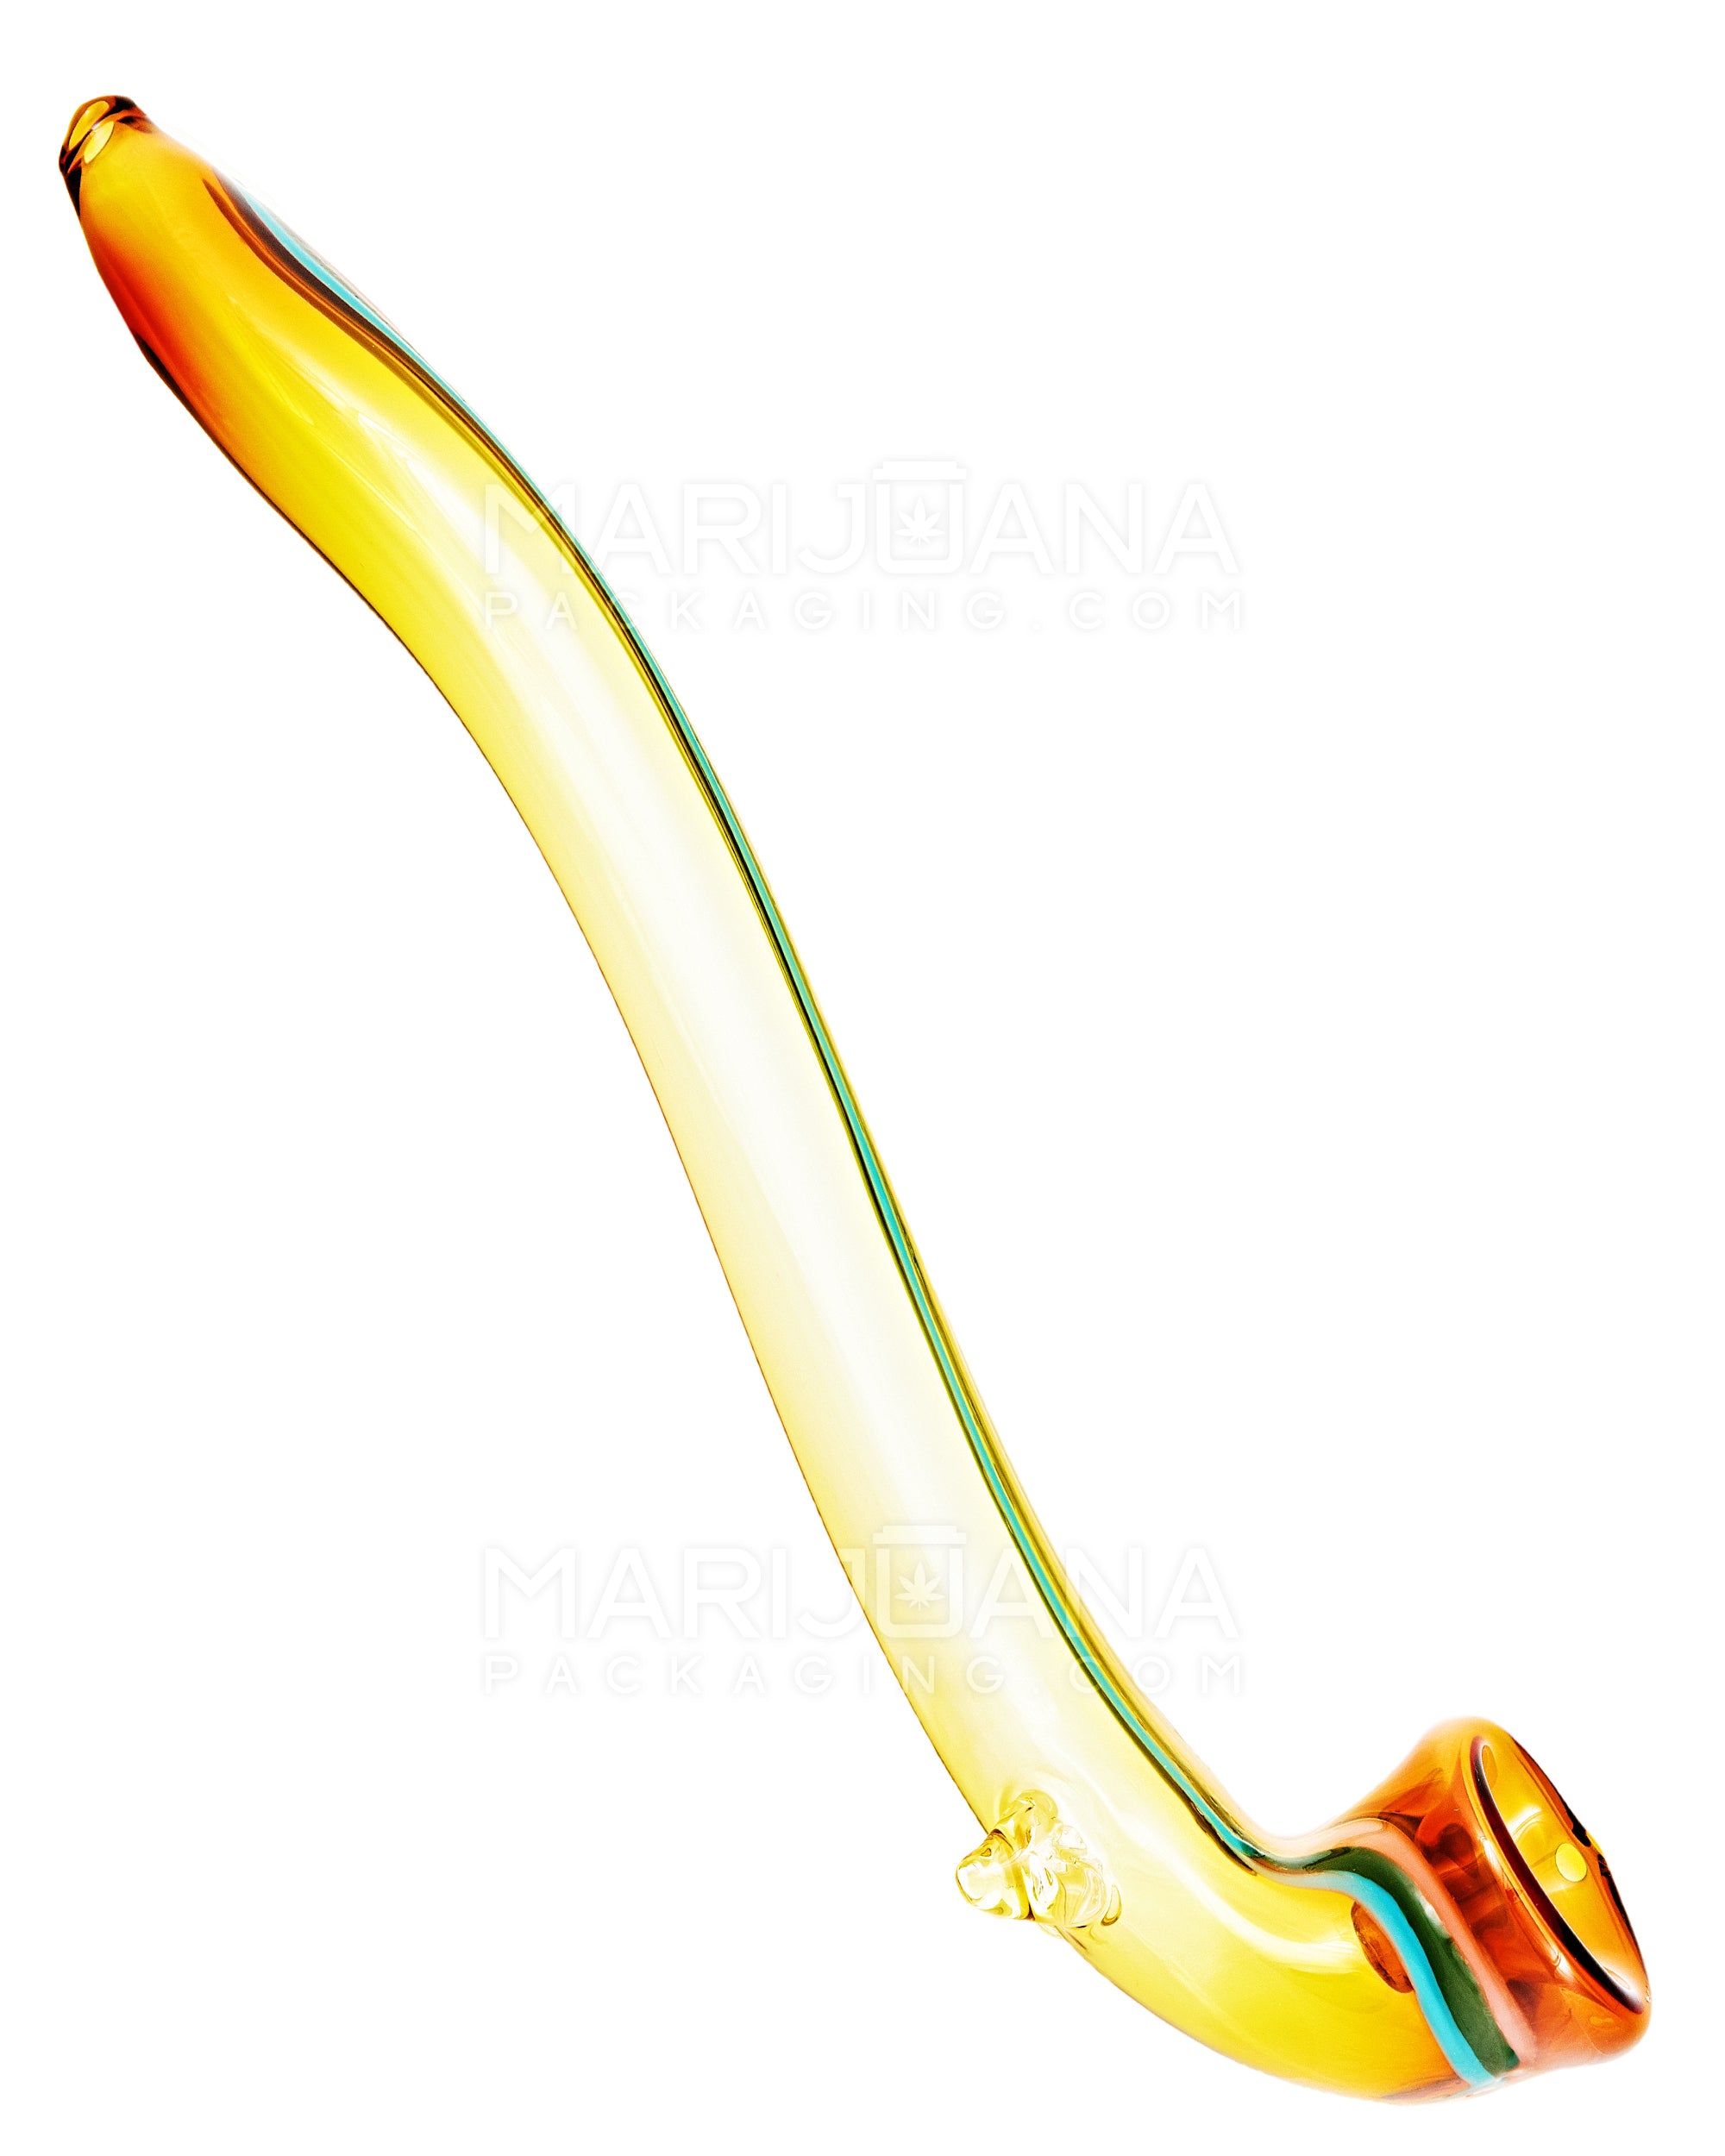 USA Glass | Striped Giant Sherlock Pipe | 15in Long - Glass - Assorted - 7